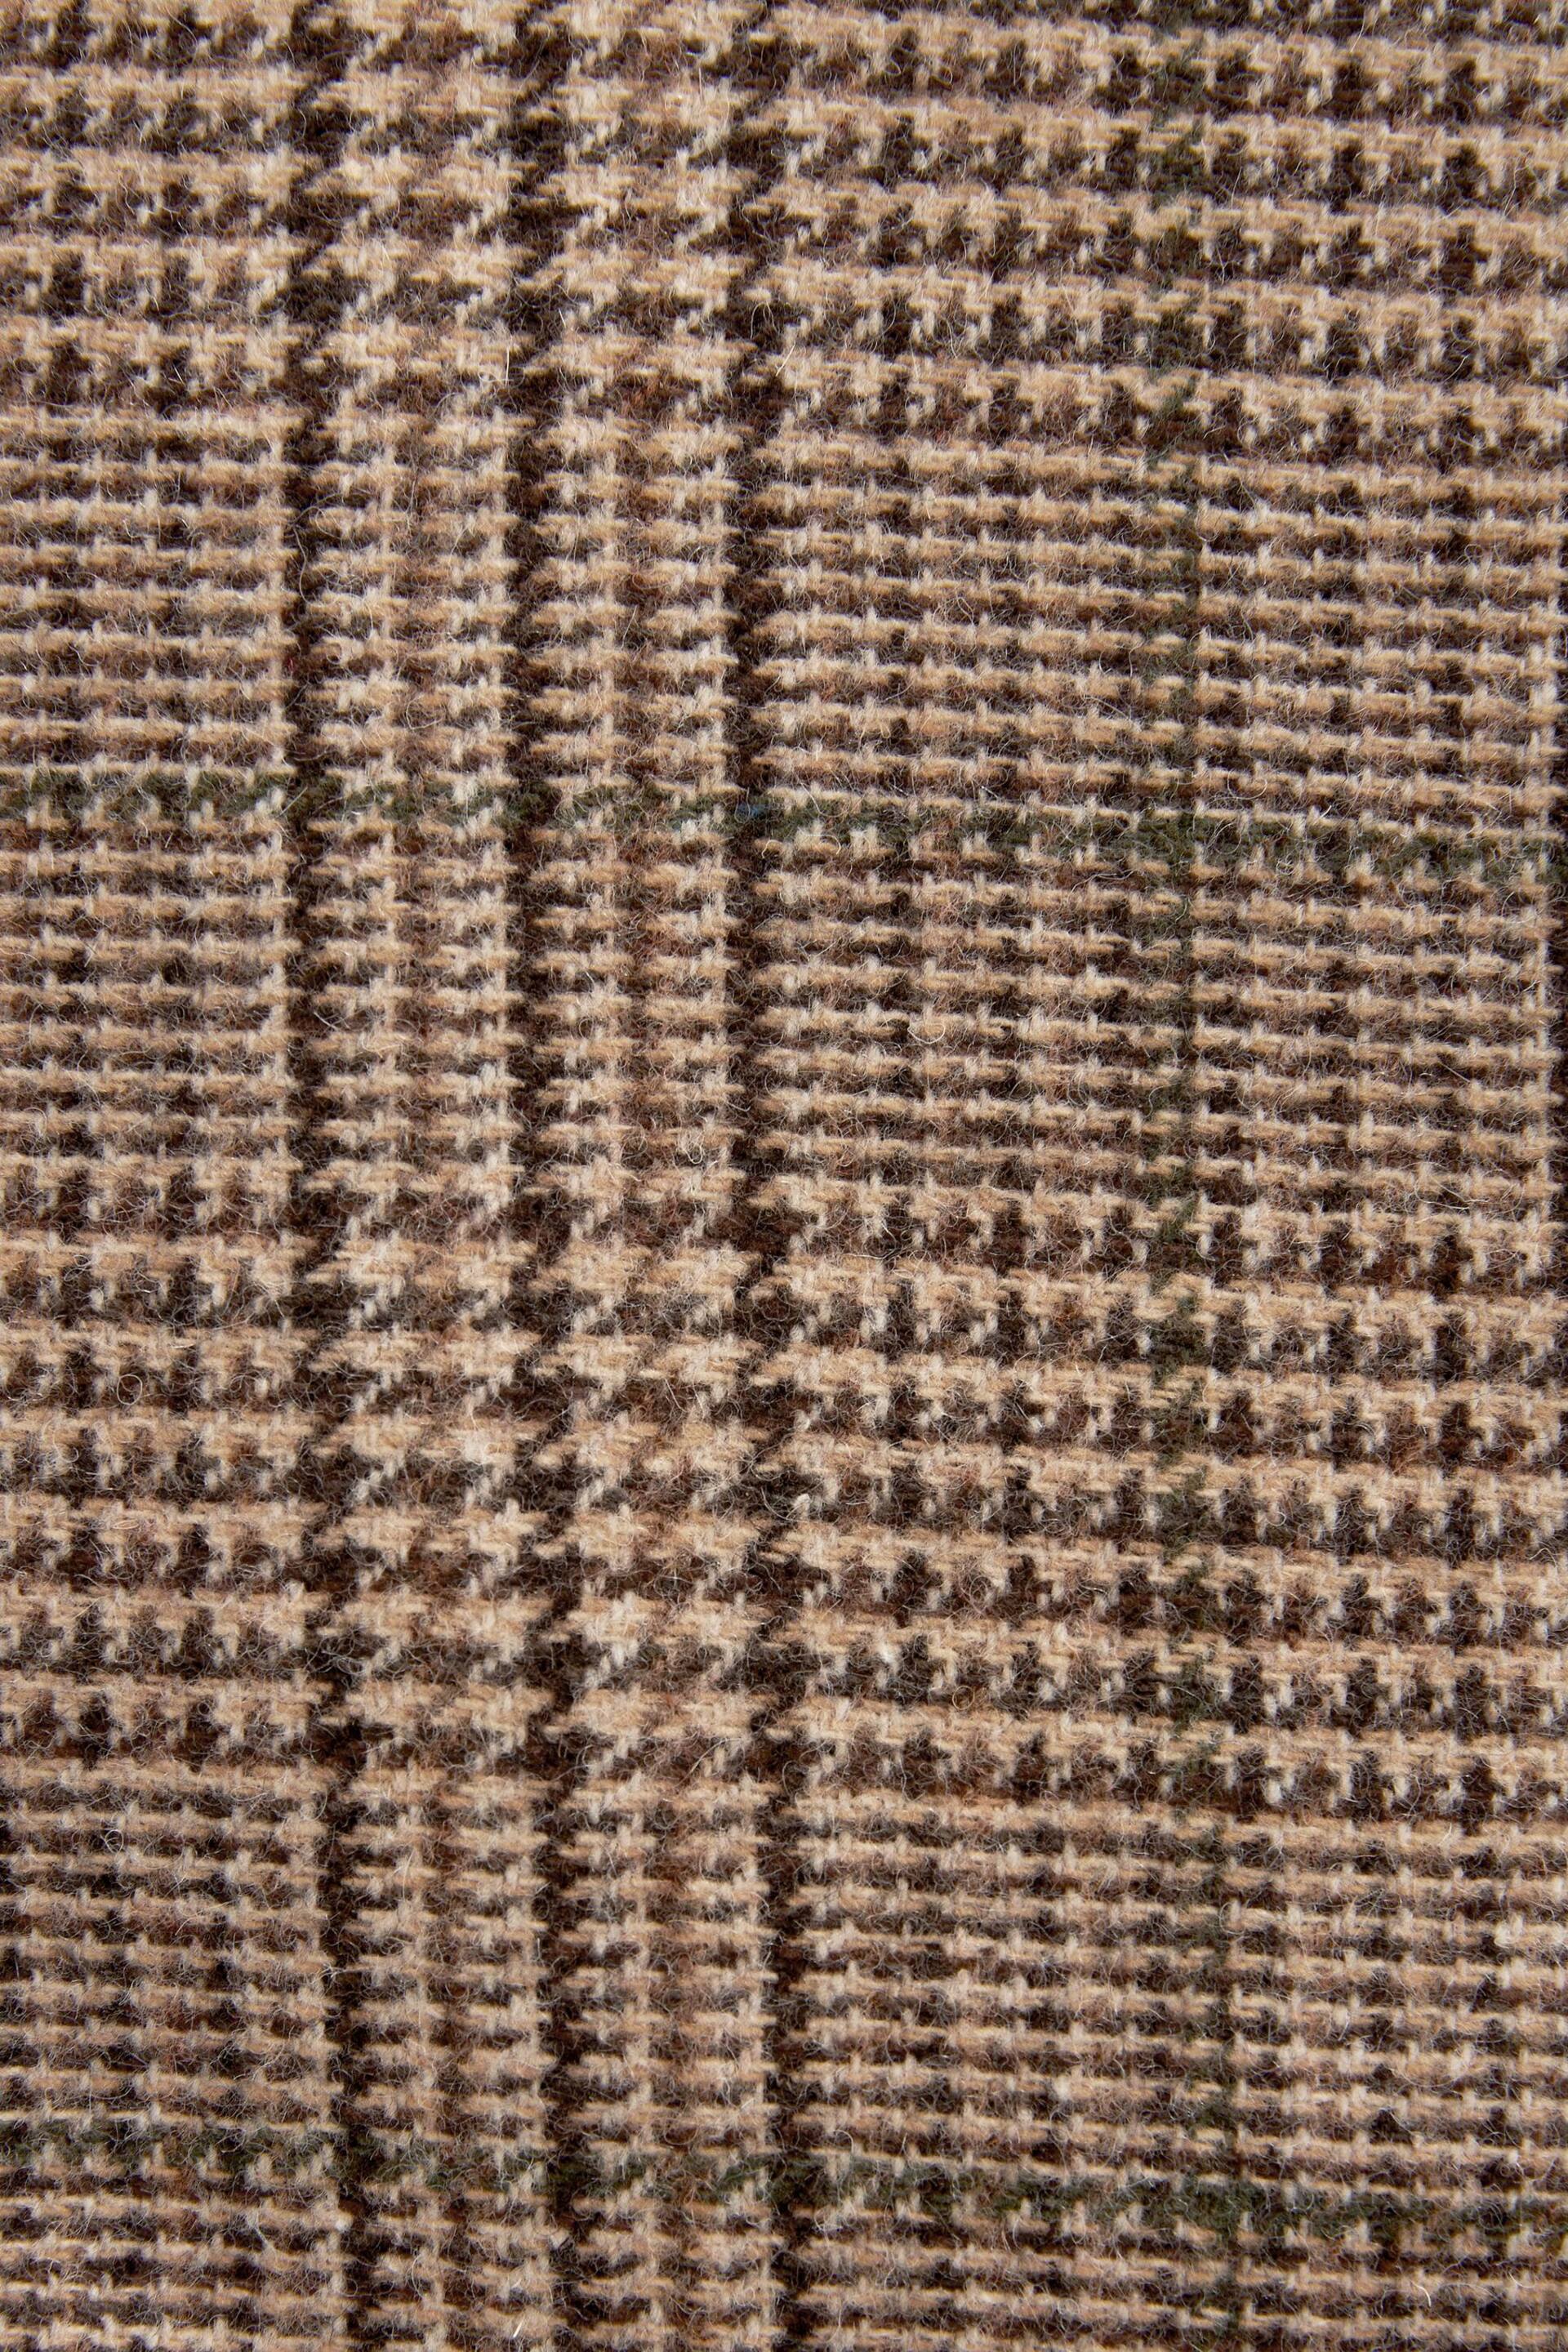 Brown Slim Wool Content Check Suit Jacket - Image 11 of 12